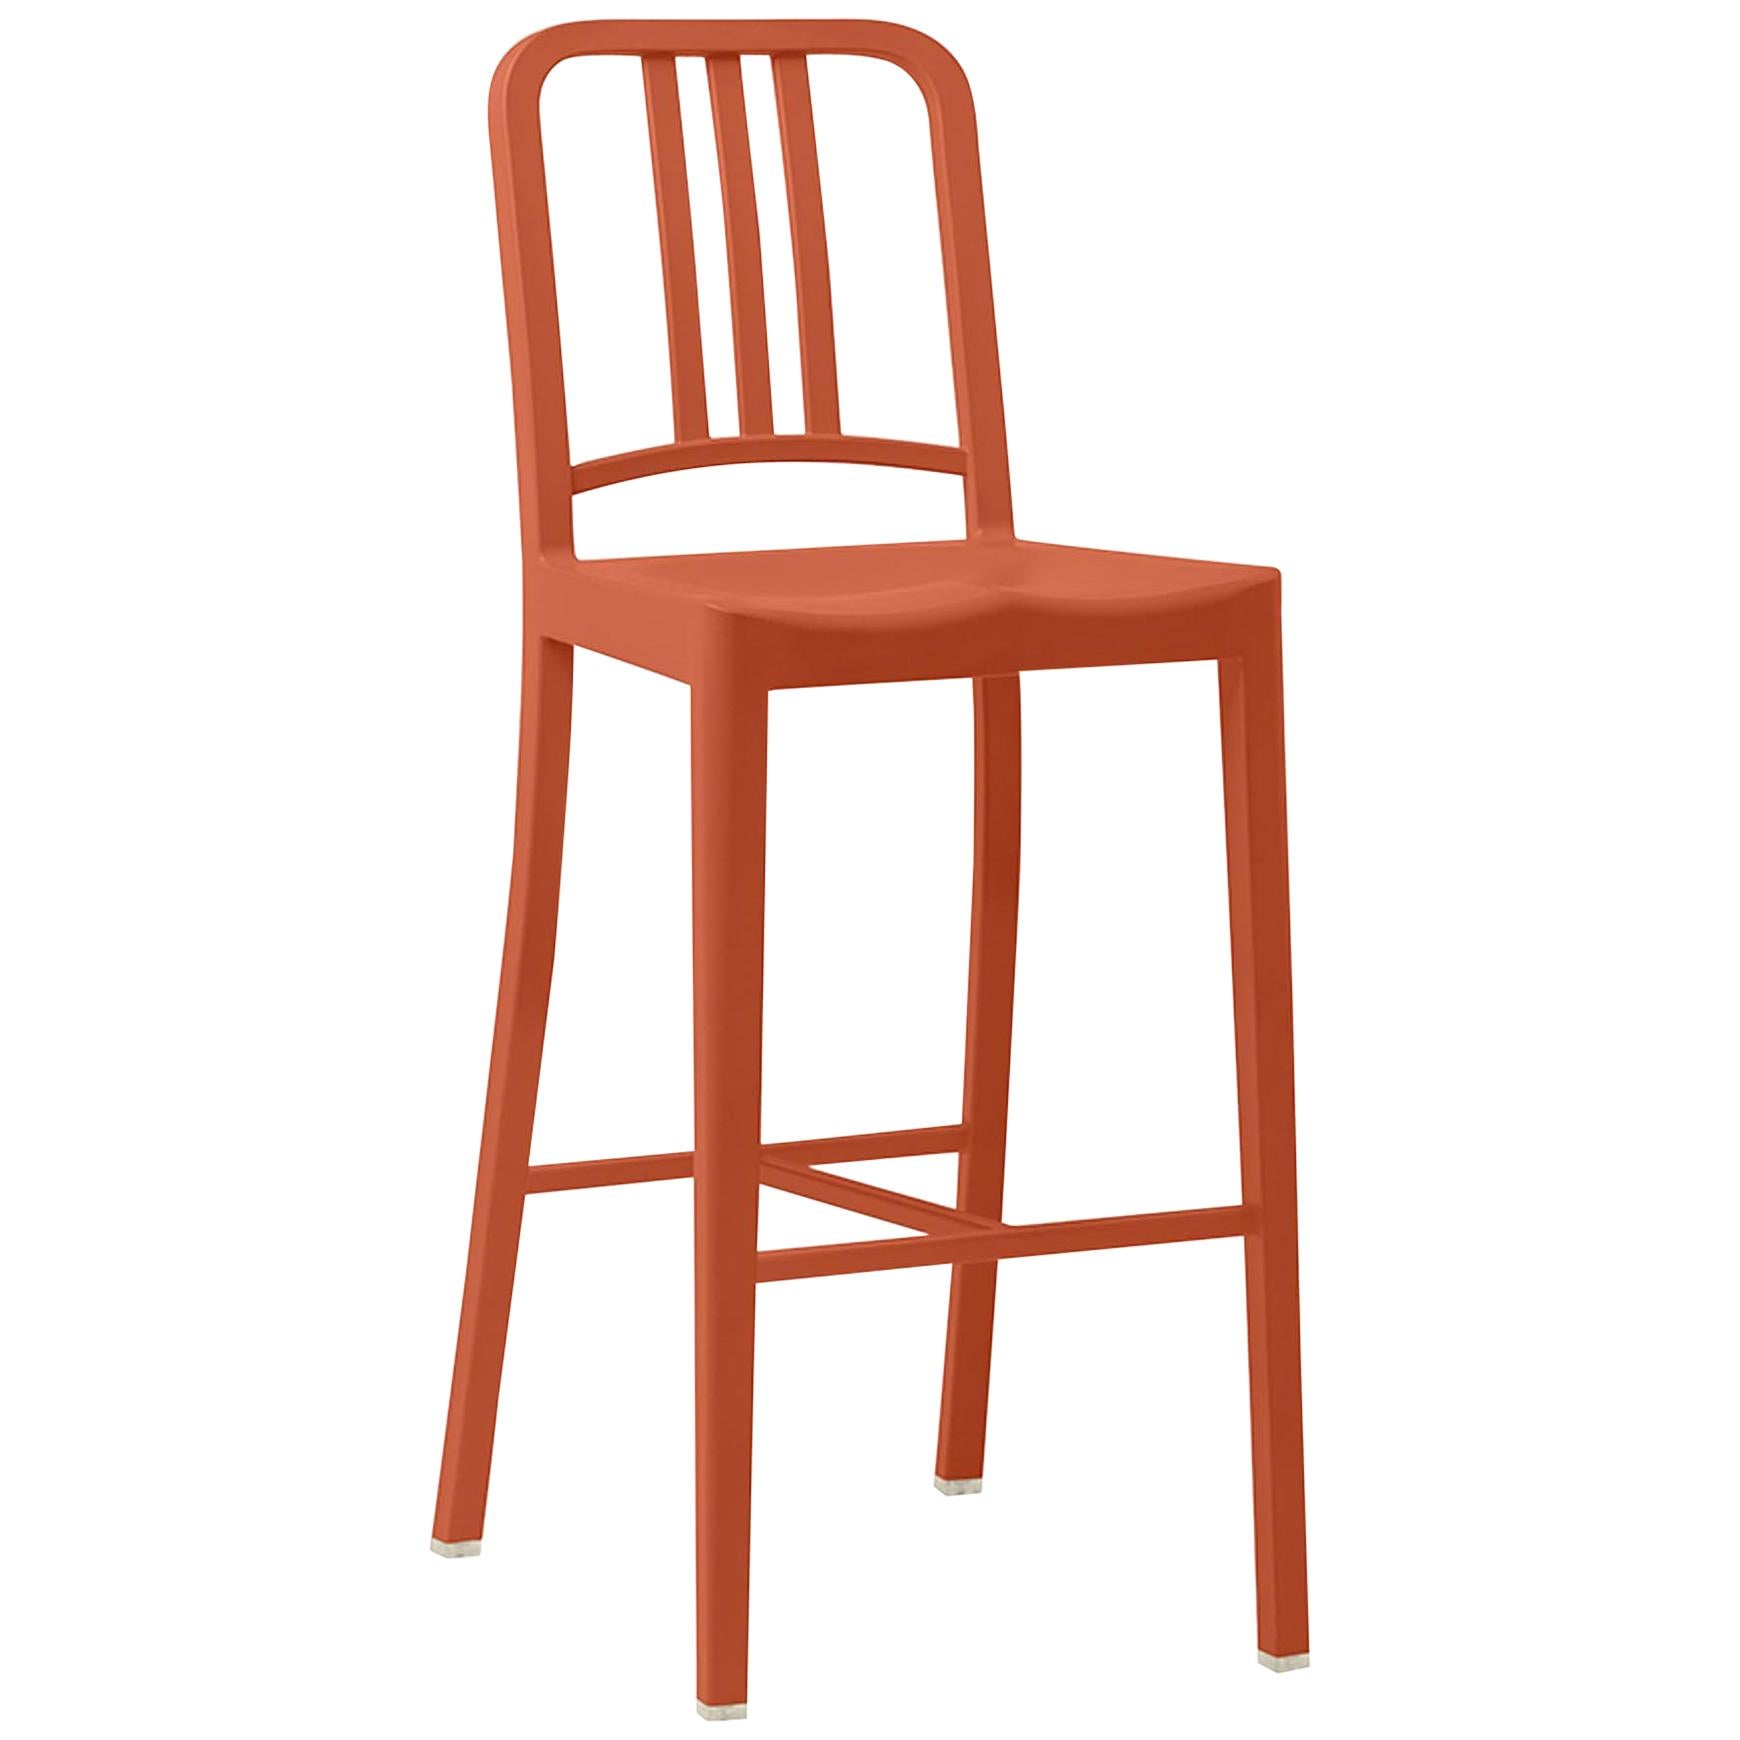 Emeco 111 Navy Barstool in Persimmon by Coca-Cola For Sale